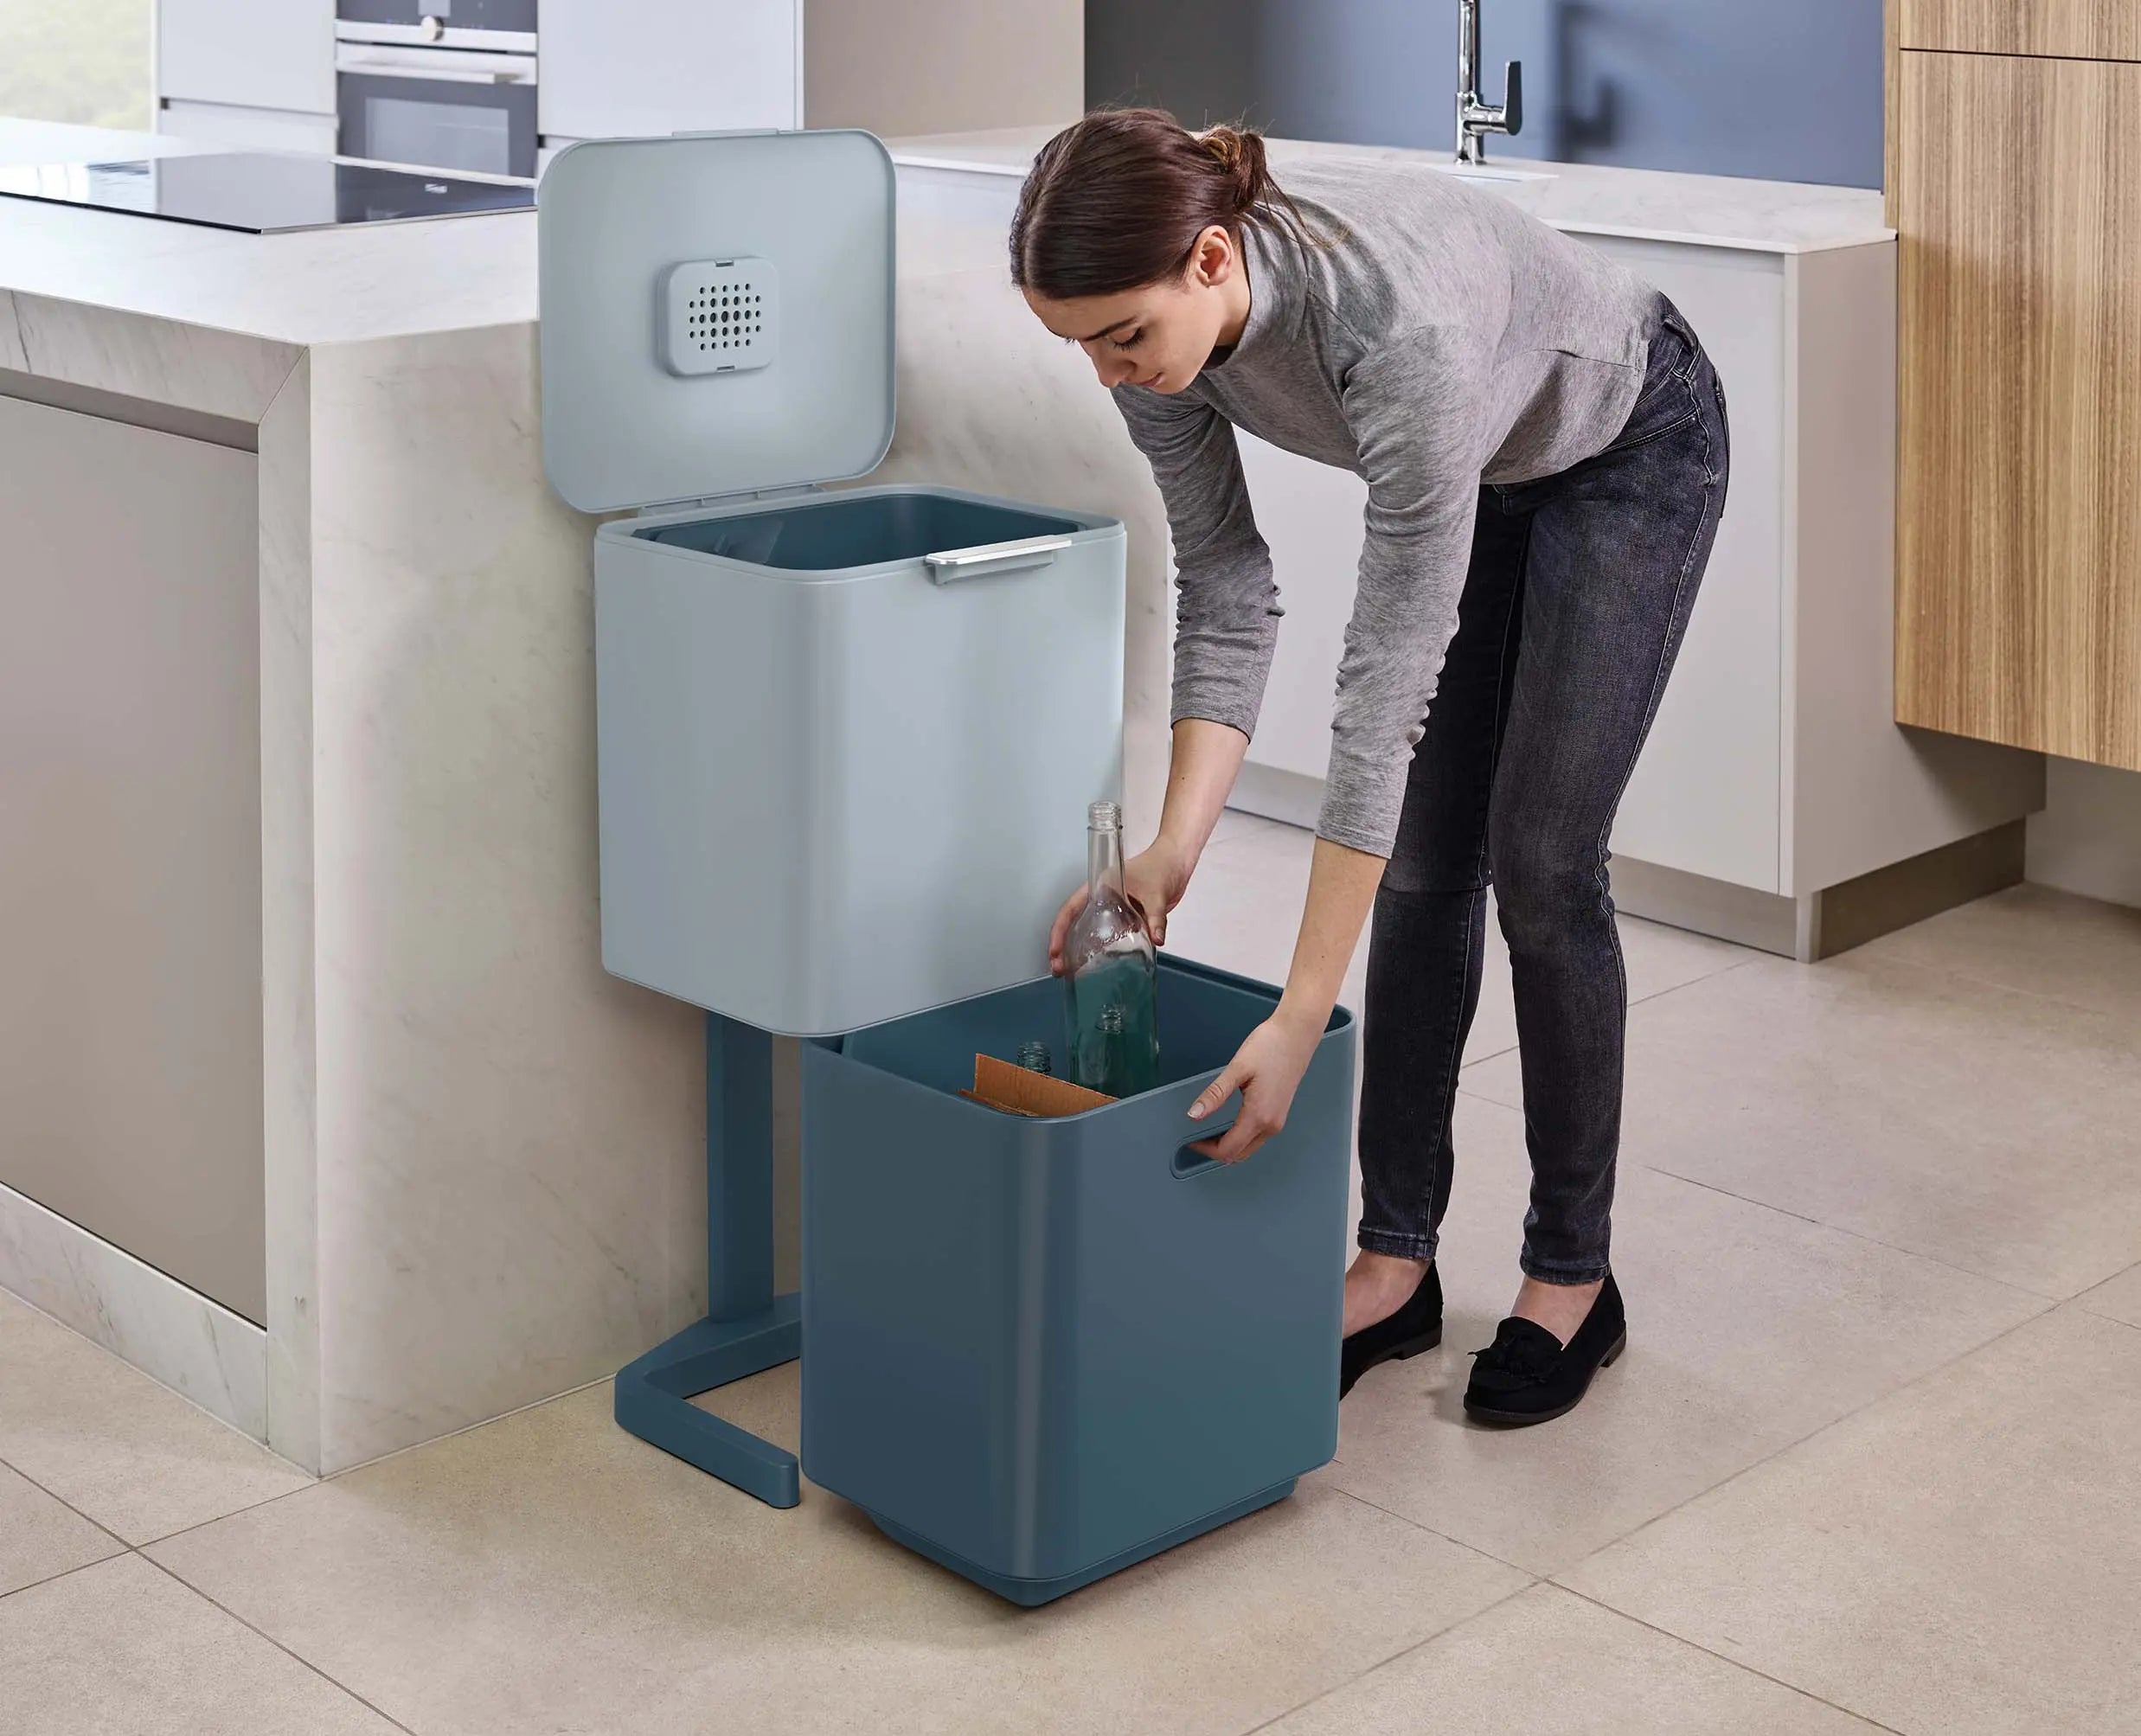 Totem Max 60L Waste &amp; Recycling Bin - Editions - 30093 - Image 3